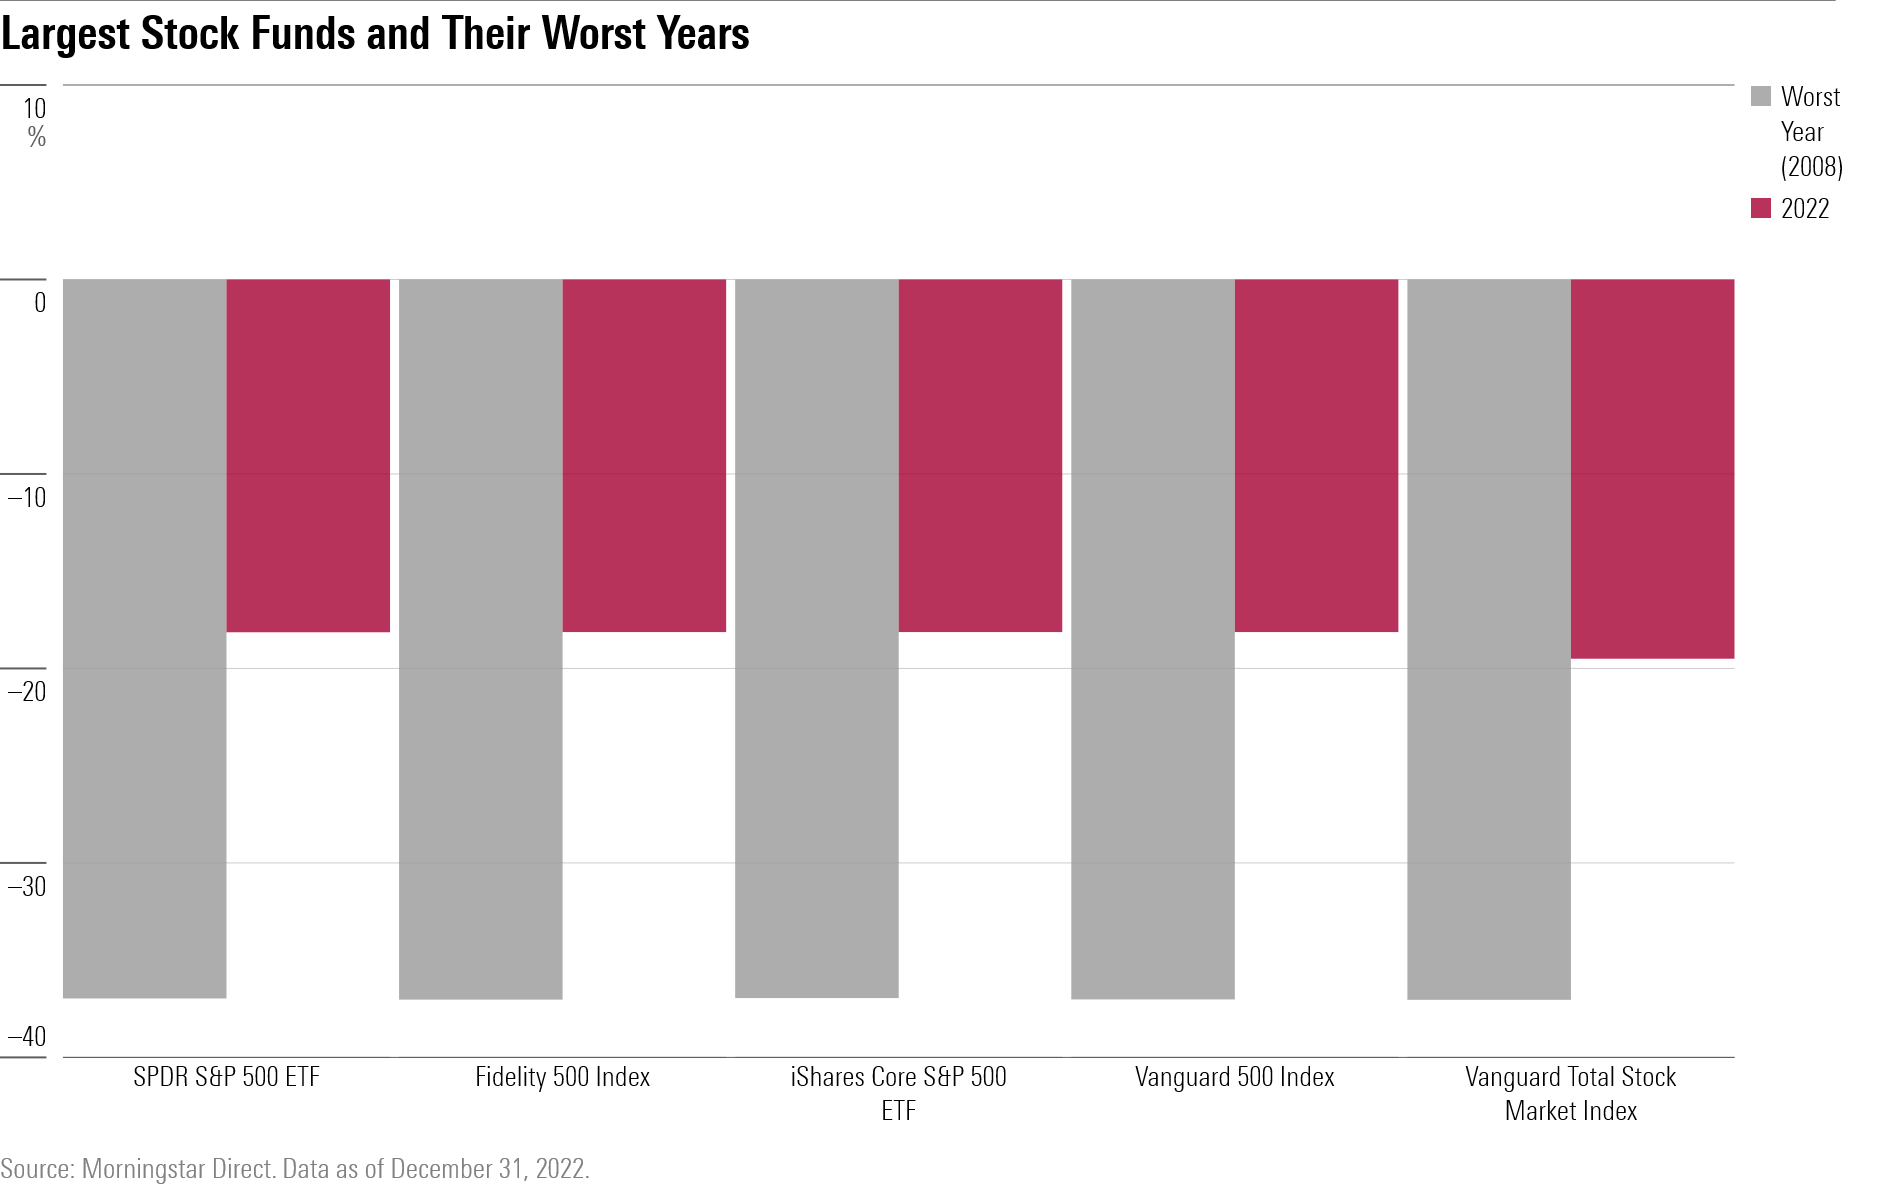 Bar chart showing the worst years for the largest U.S. stock mutual funds and etfs